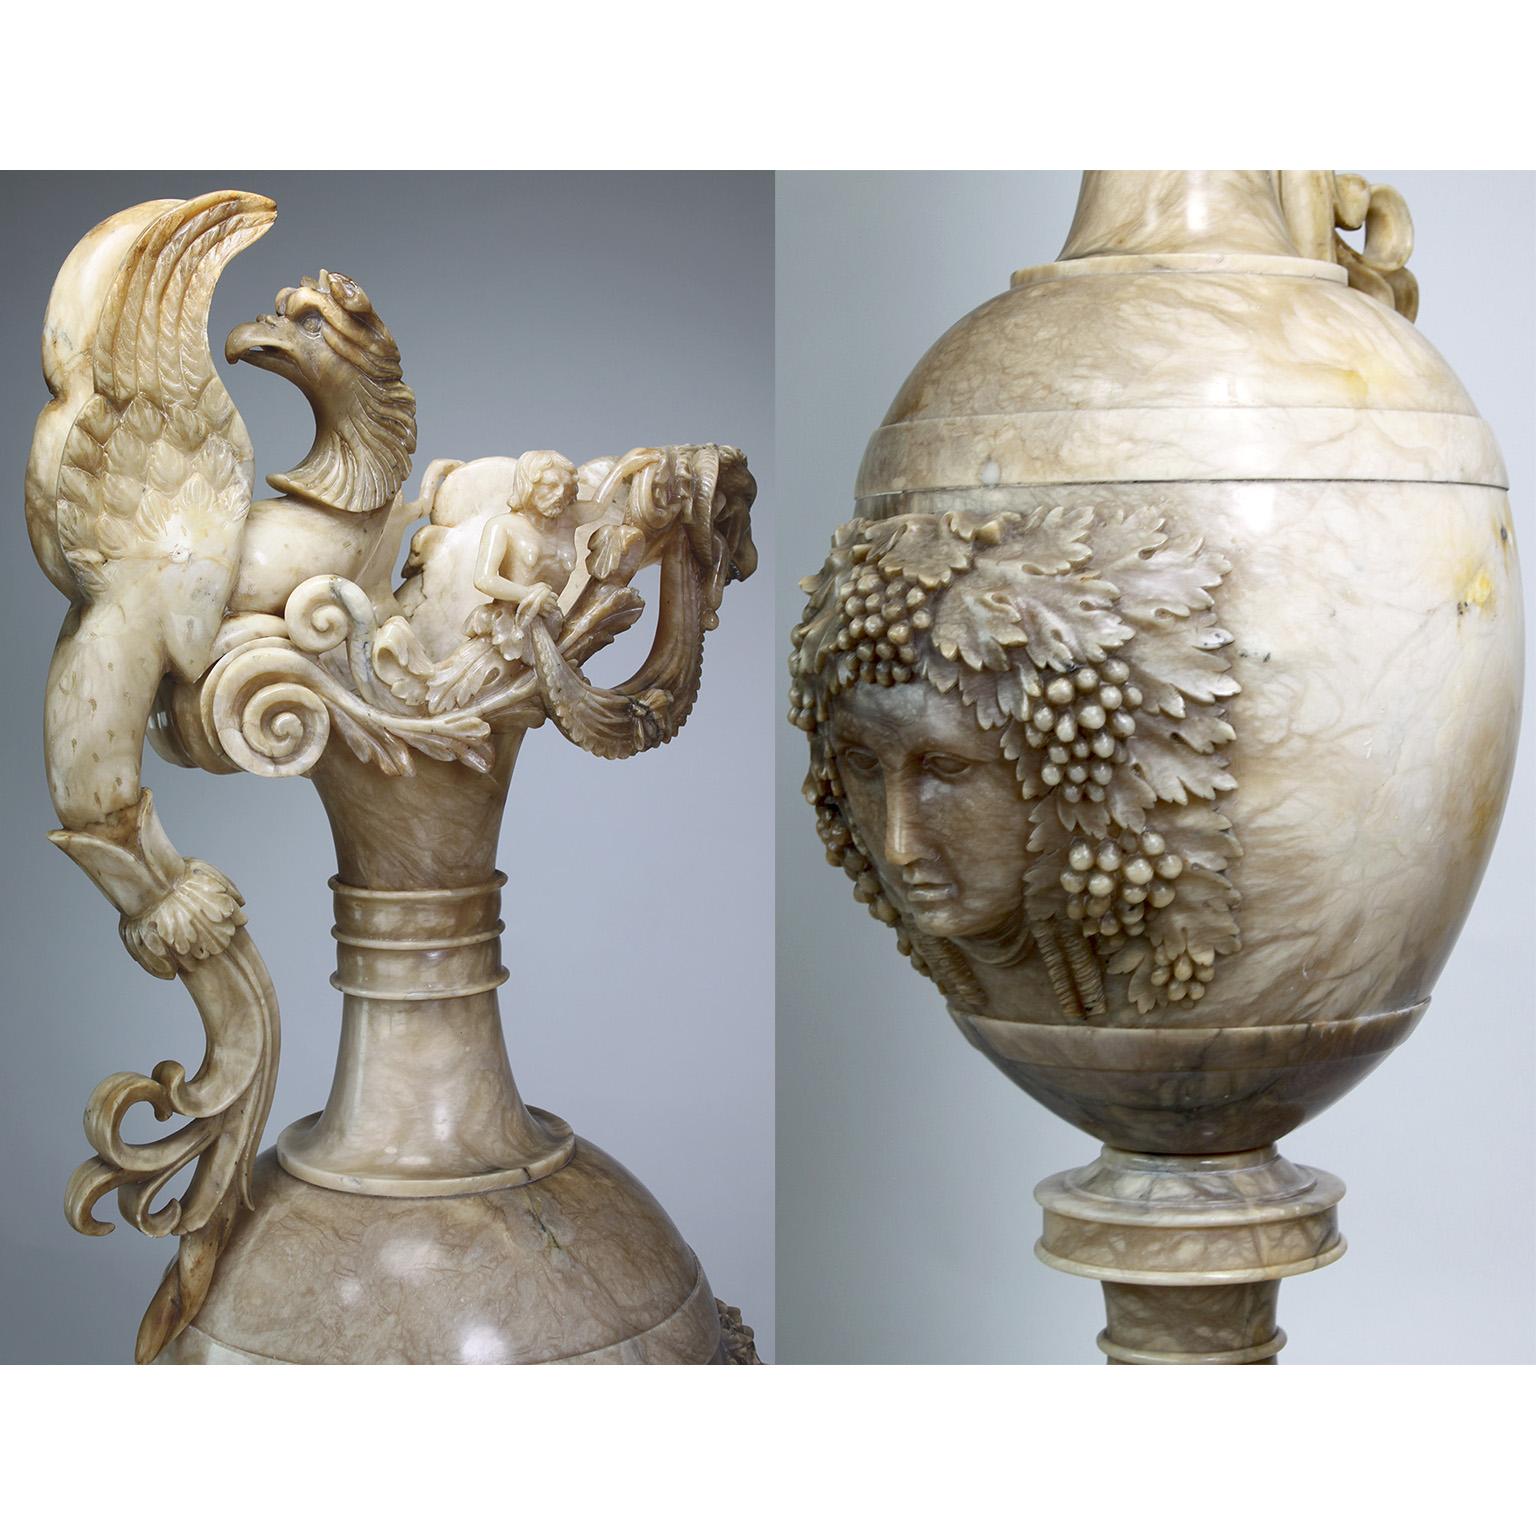 Monumental Italian 19th Century Renaissance Revival Style Carved Alabaster Urn  For Sale 13